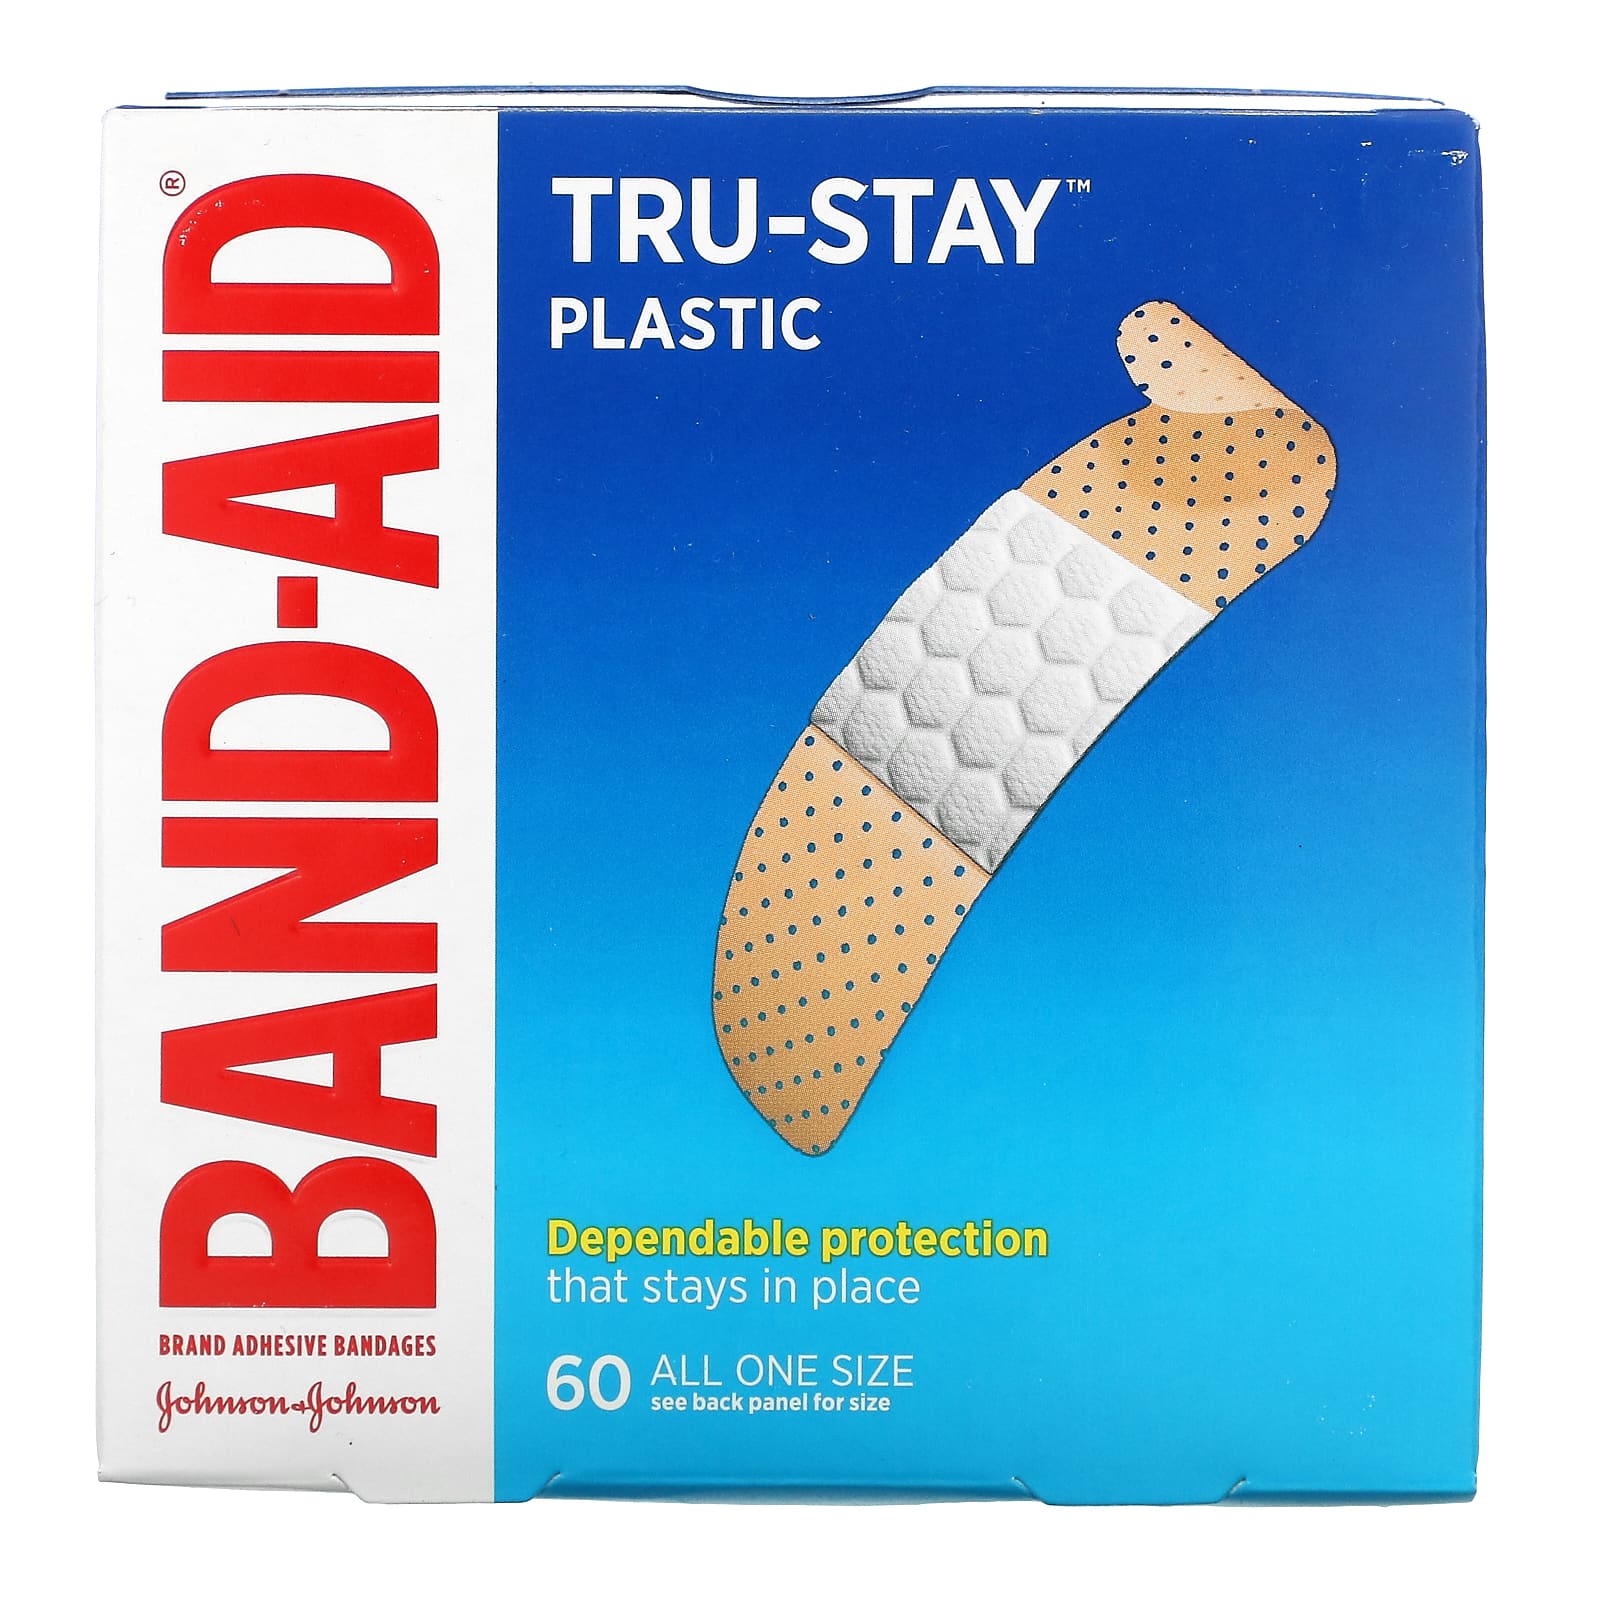 Band Aid Adhesive Bandages Plastic Strips 60 Bandages 100pcs waterproof band aid cute cartoon breathable wound bandages first hemostasis adhesive bandages kids children medical patch